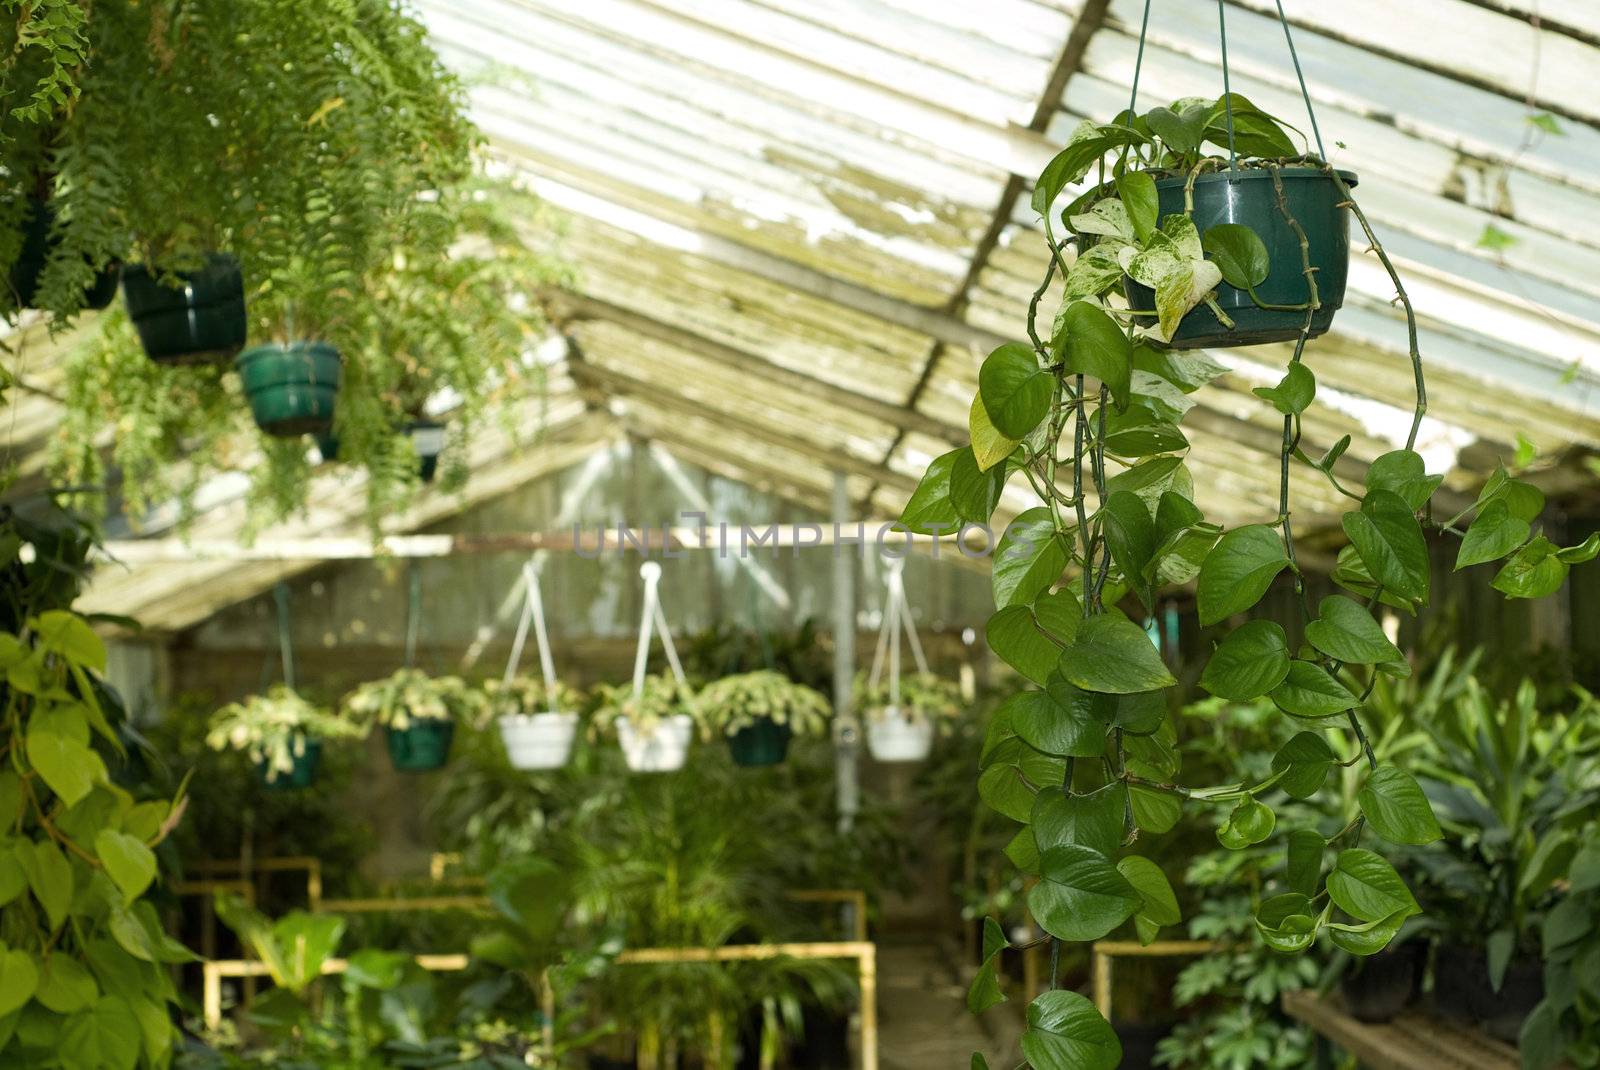 View of Variety of Nursery Plants Hanging from the Roof